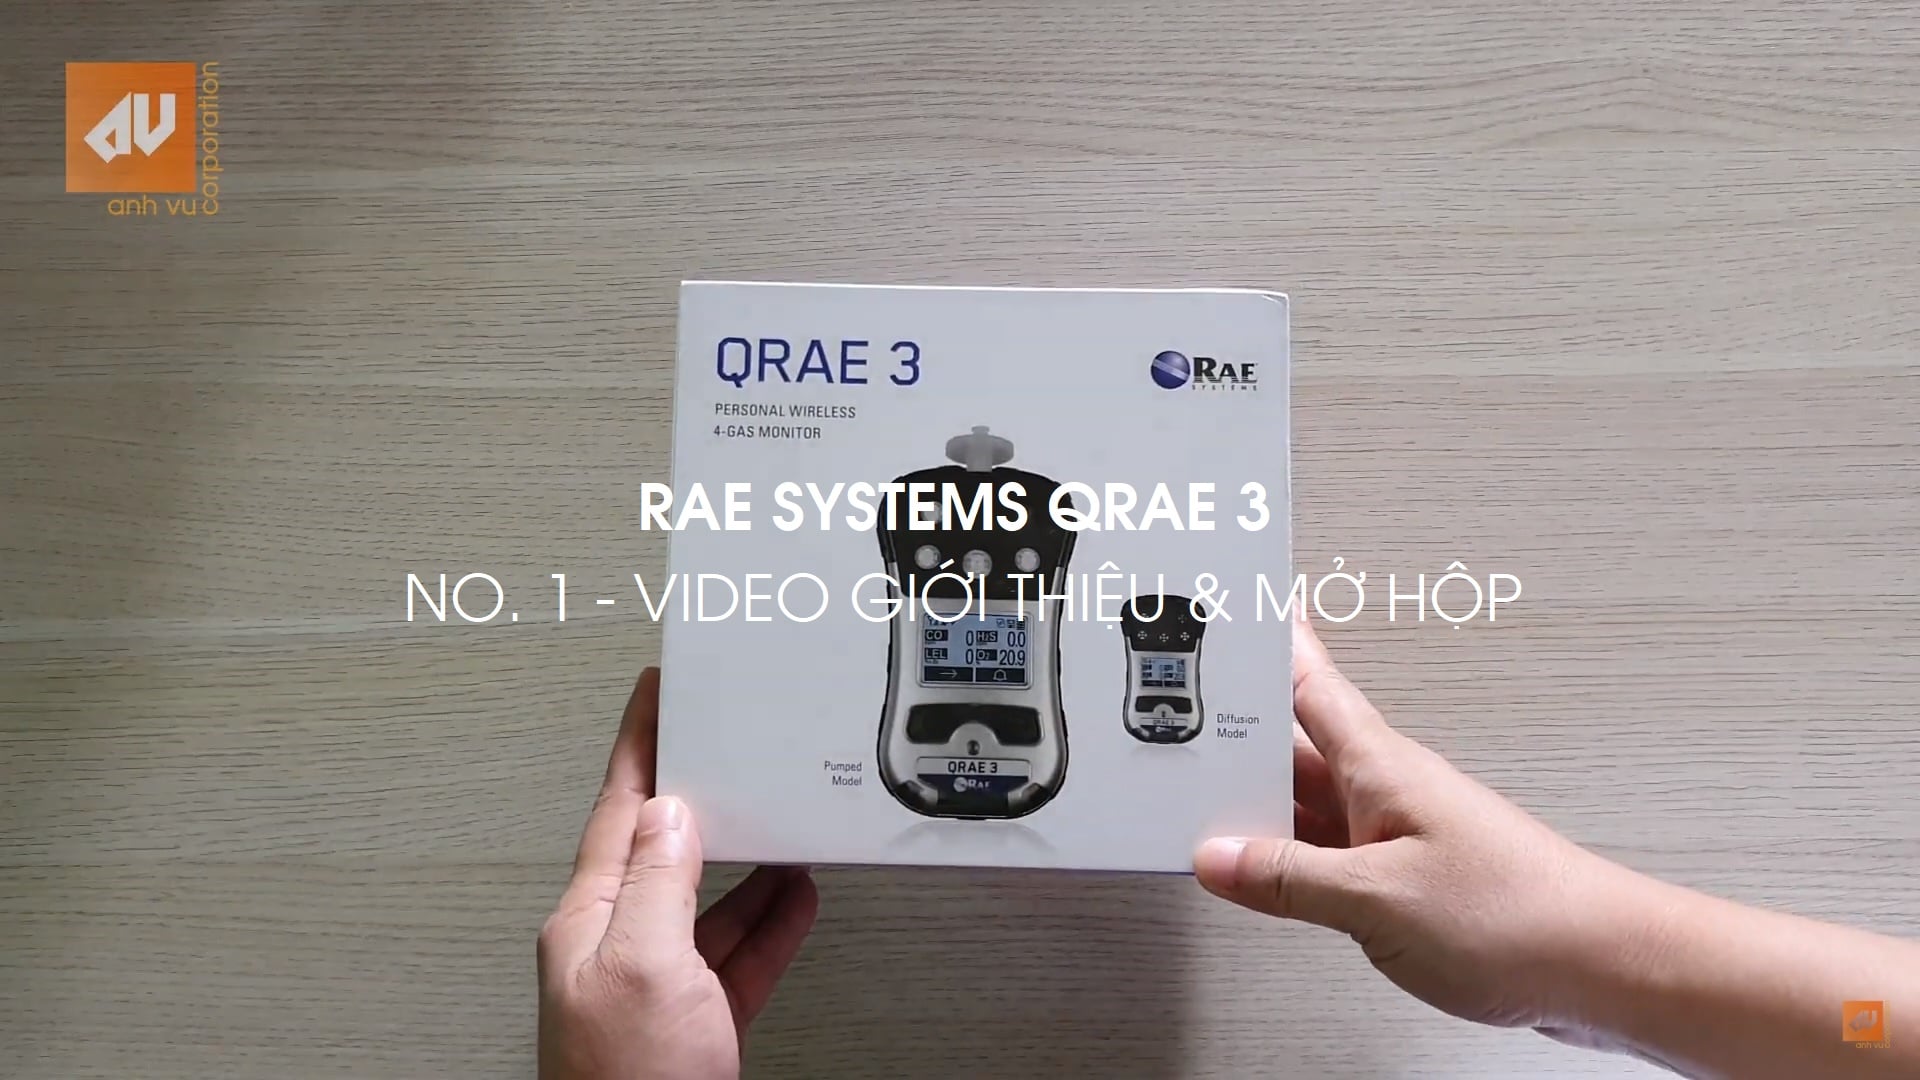 What is different between Qrae II and Qrae 3